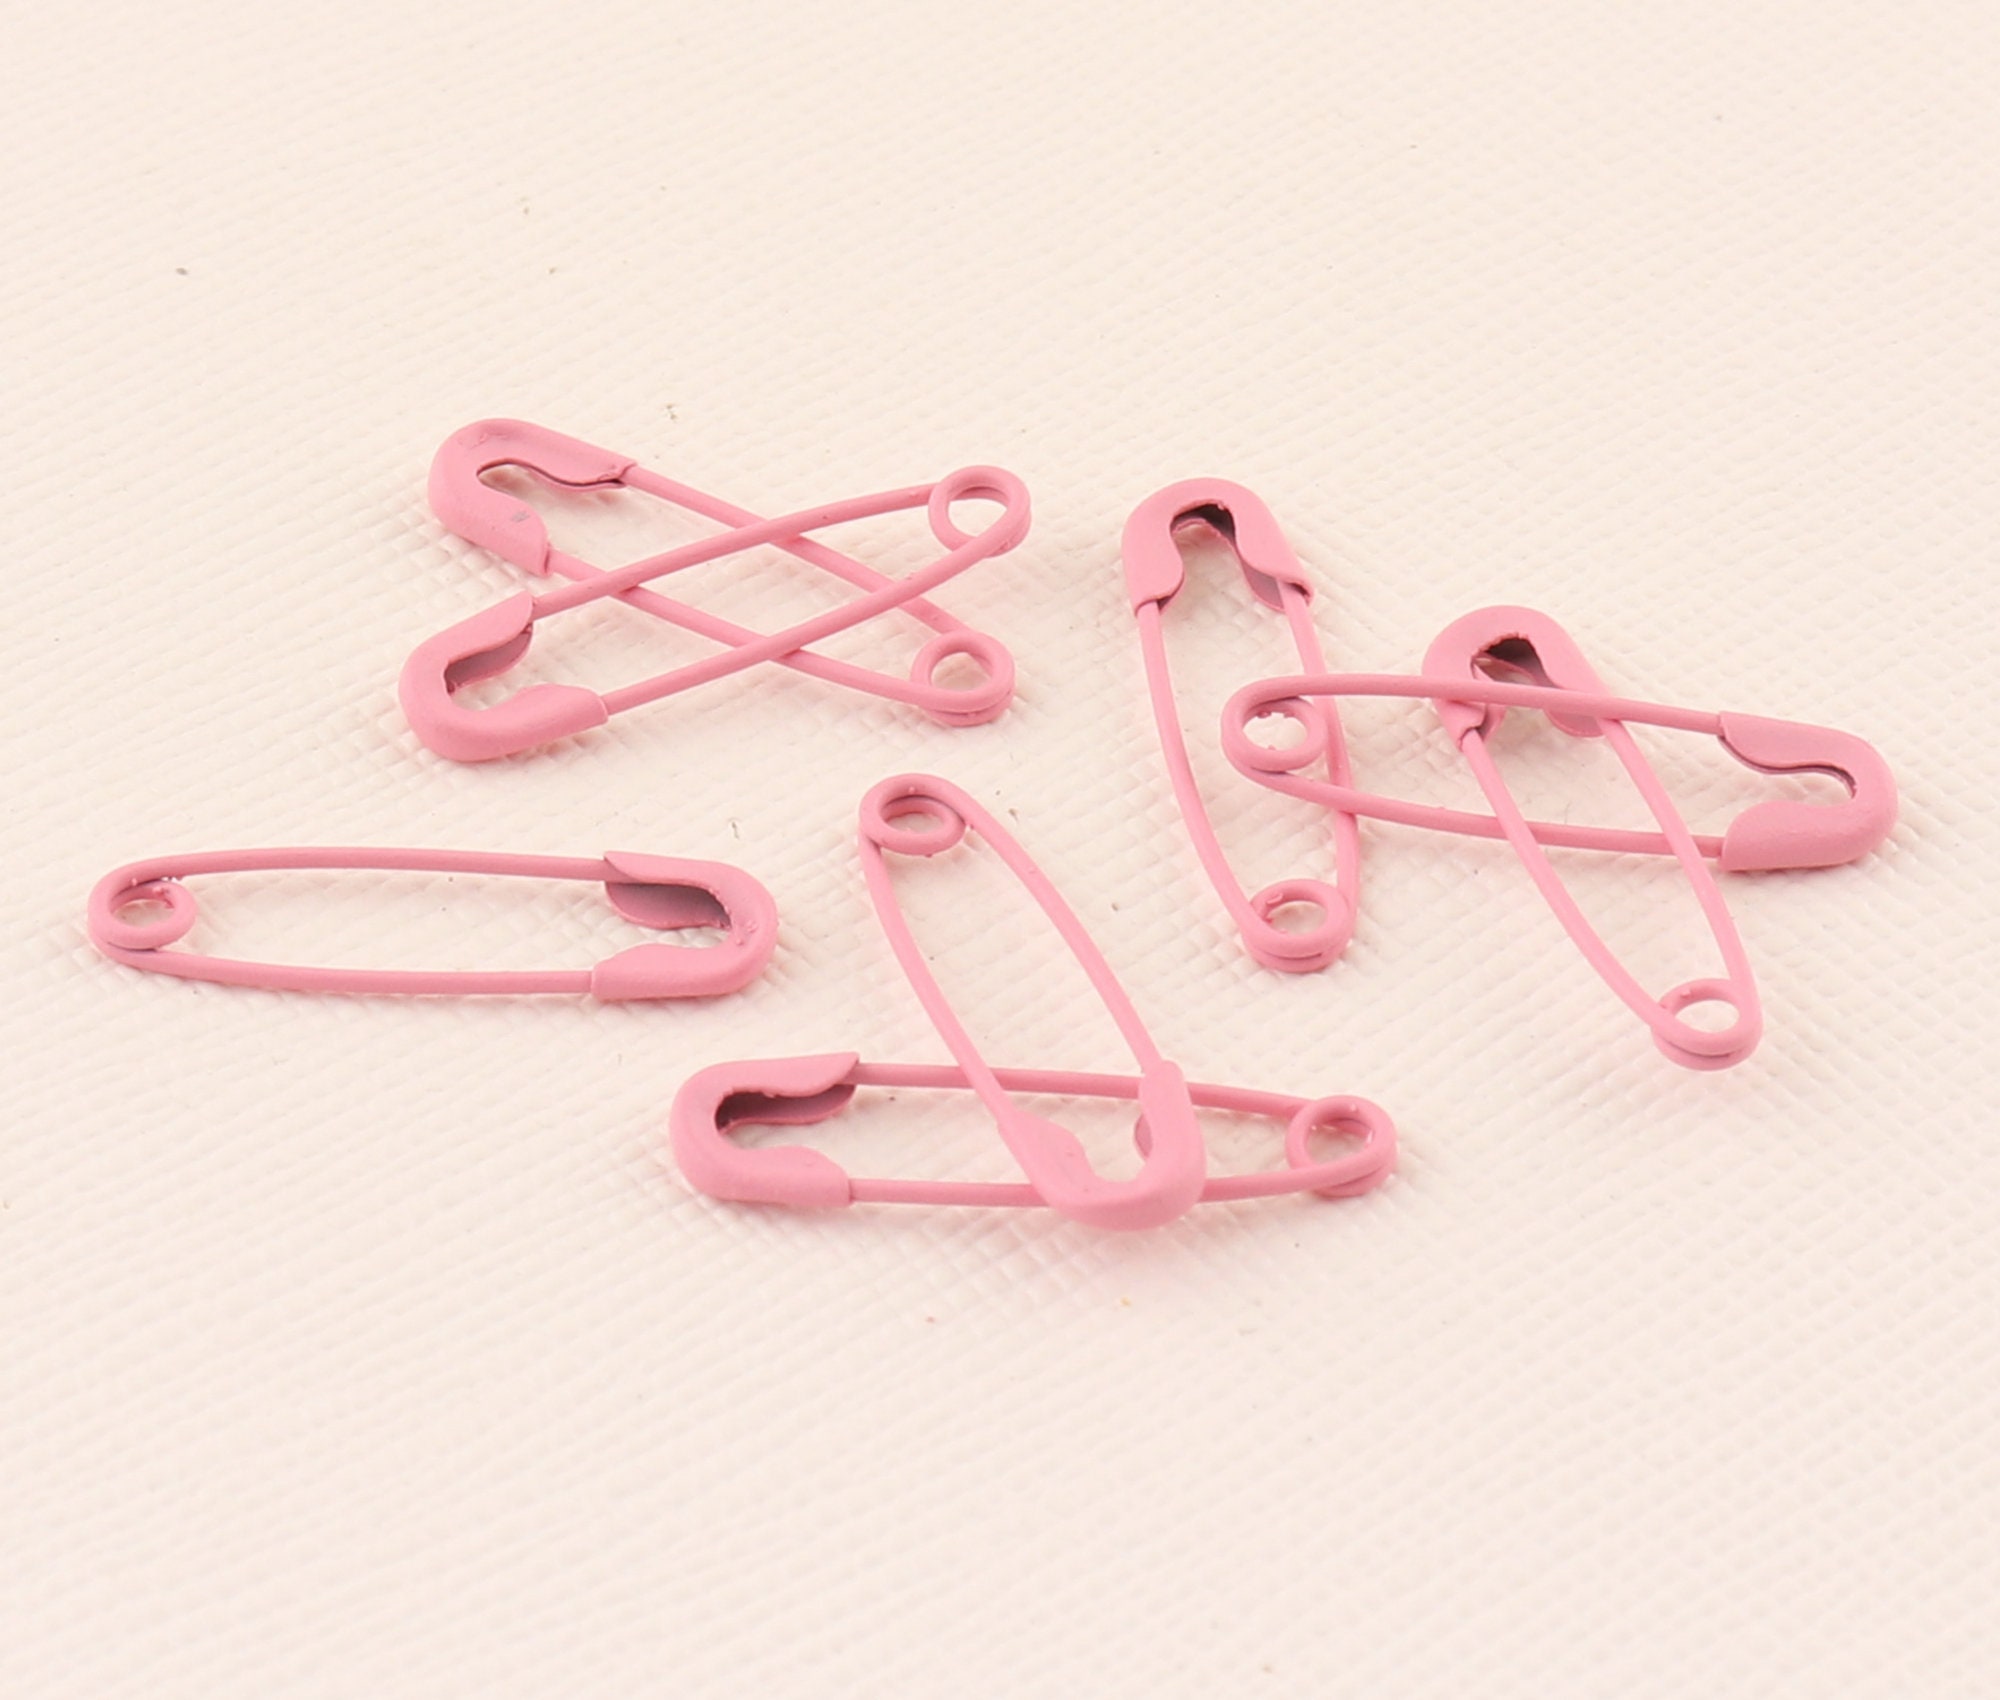 Safety Pins,pins for Clothing, Knitting Pin, Metal Pins, 20mm Clothing Pins,red  Copper Decorative Pins DIY Jewelry-500pcs 